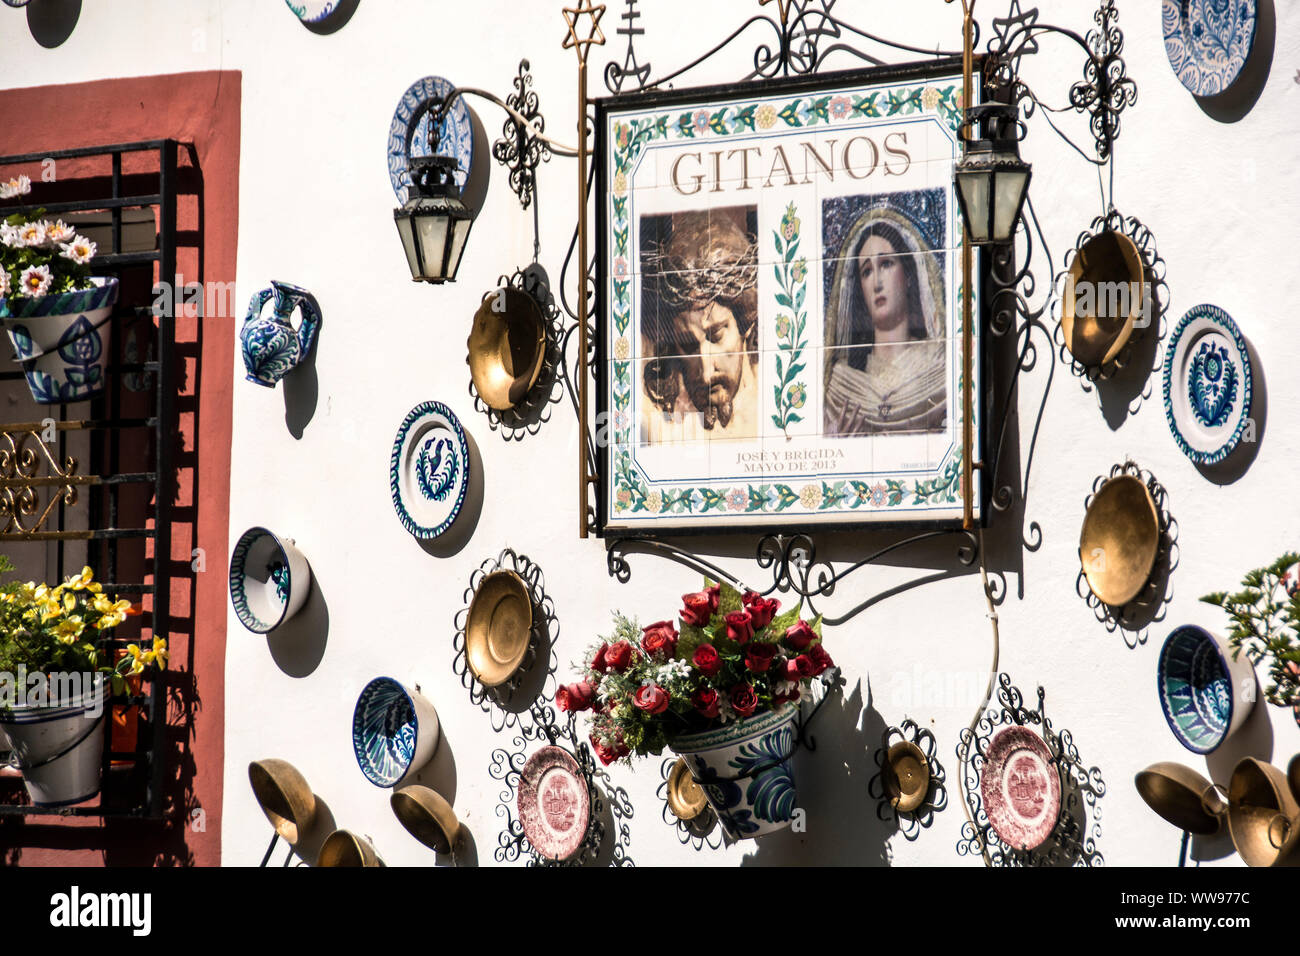 Gitano's Restaurant in Granada, Spain; famous for its plate covered walls. Stock Photo